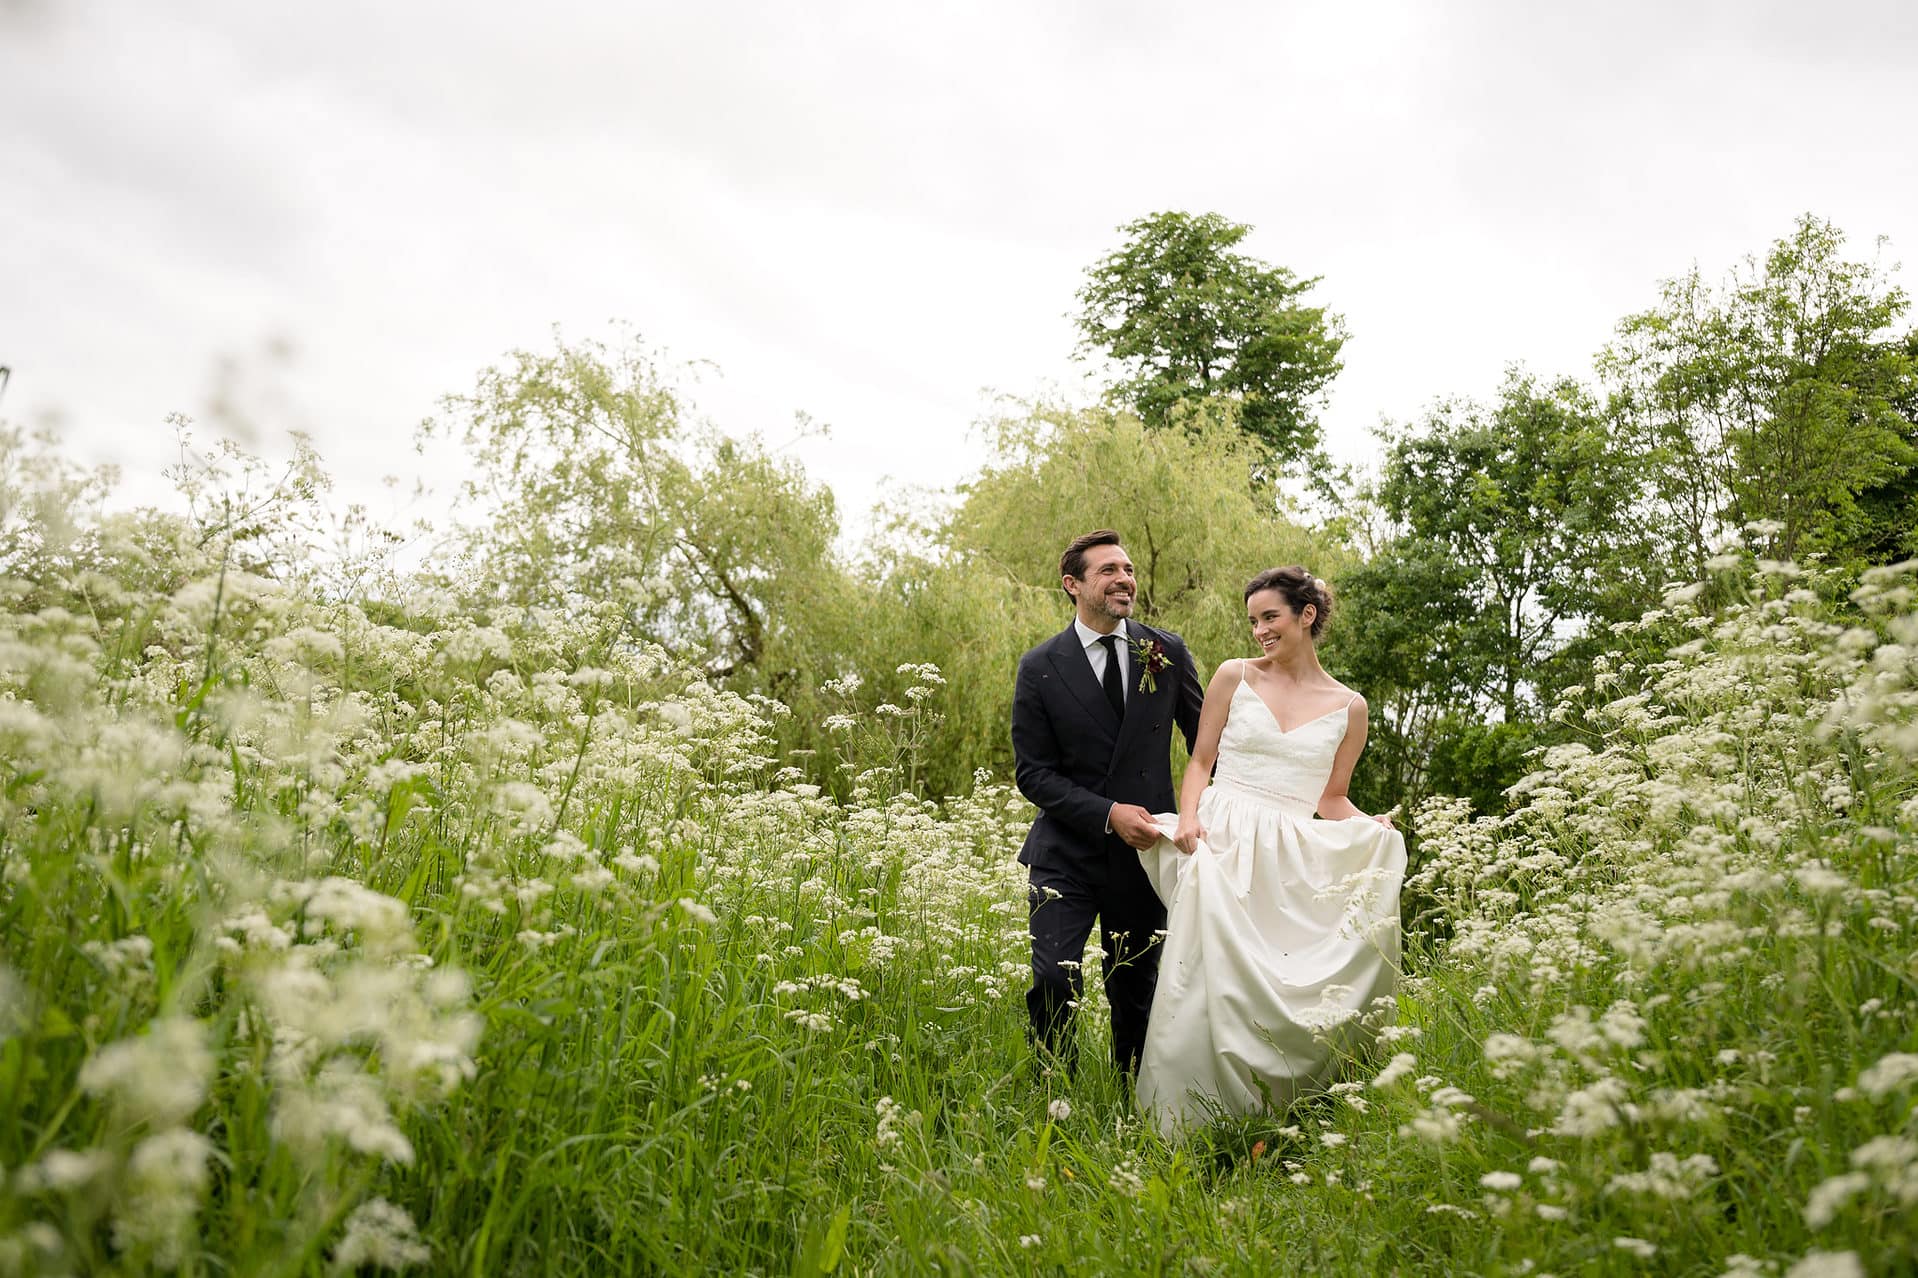 Bride and groom walking through a field of cow parsley